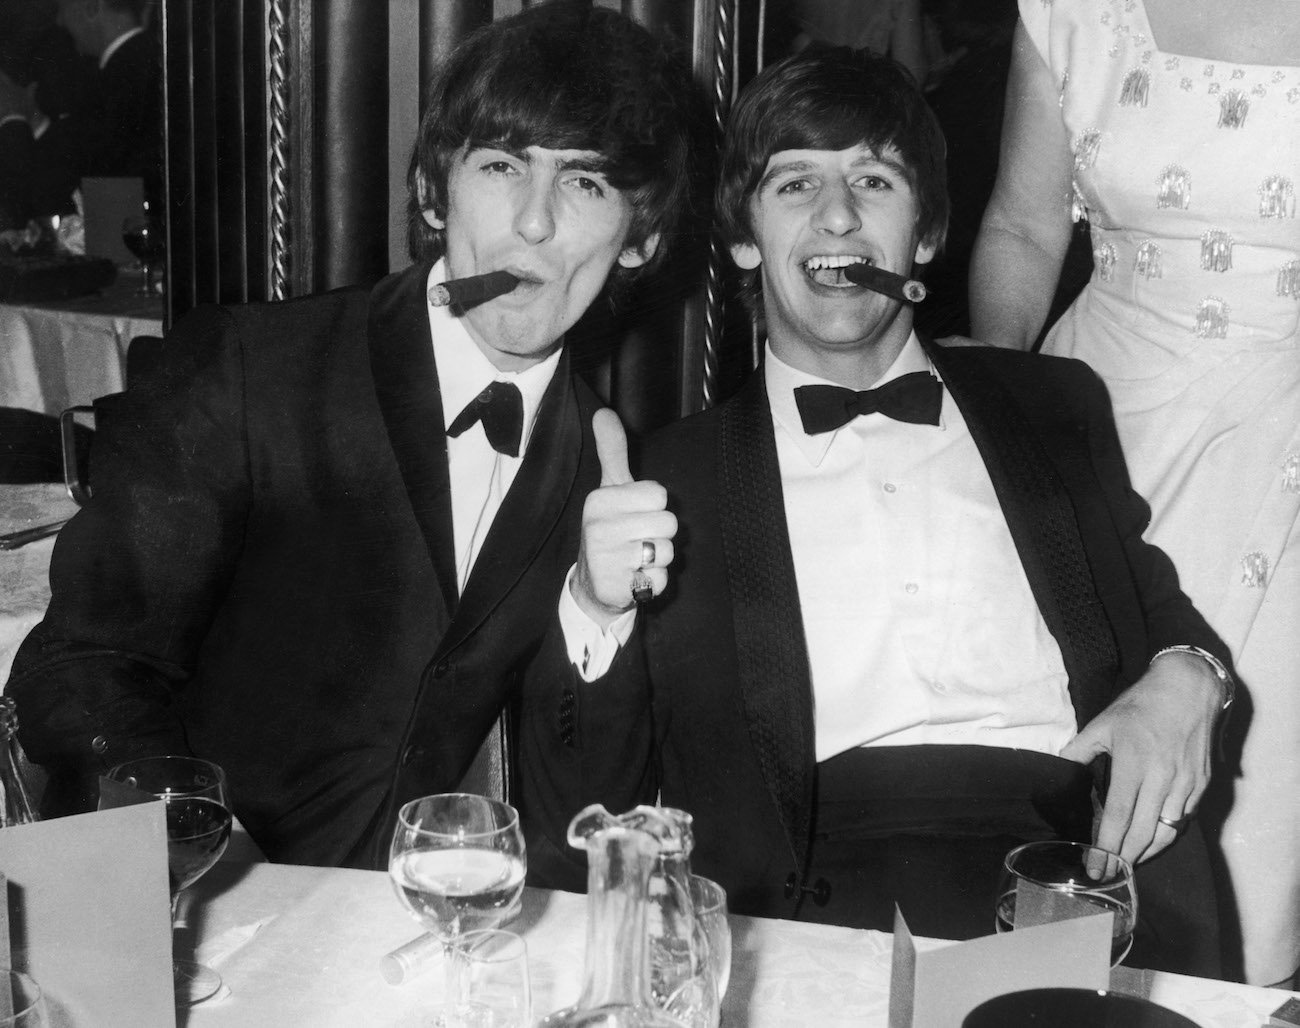 George Harrison and Ringo Starr after the presentation of the Carl Allen Awards in 1964.